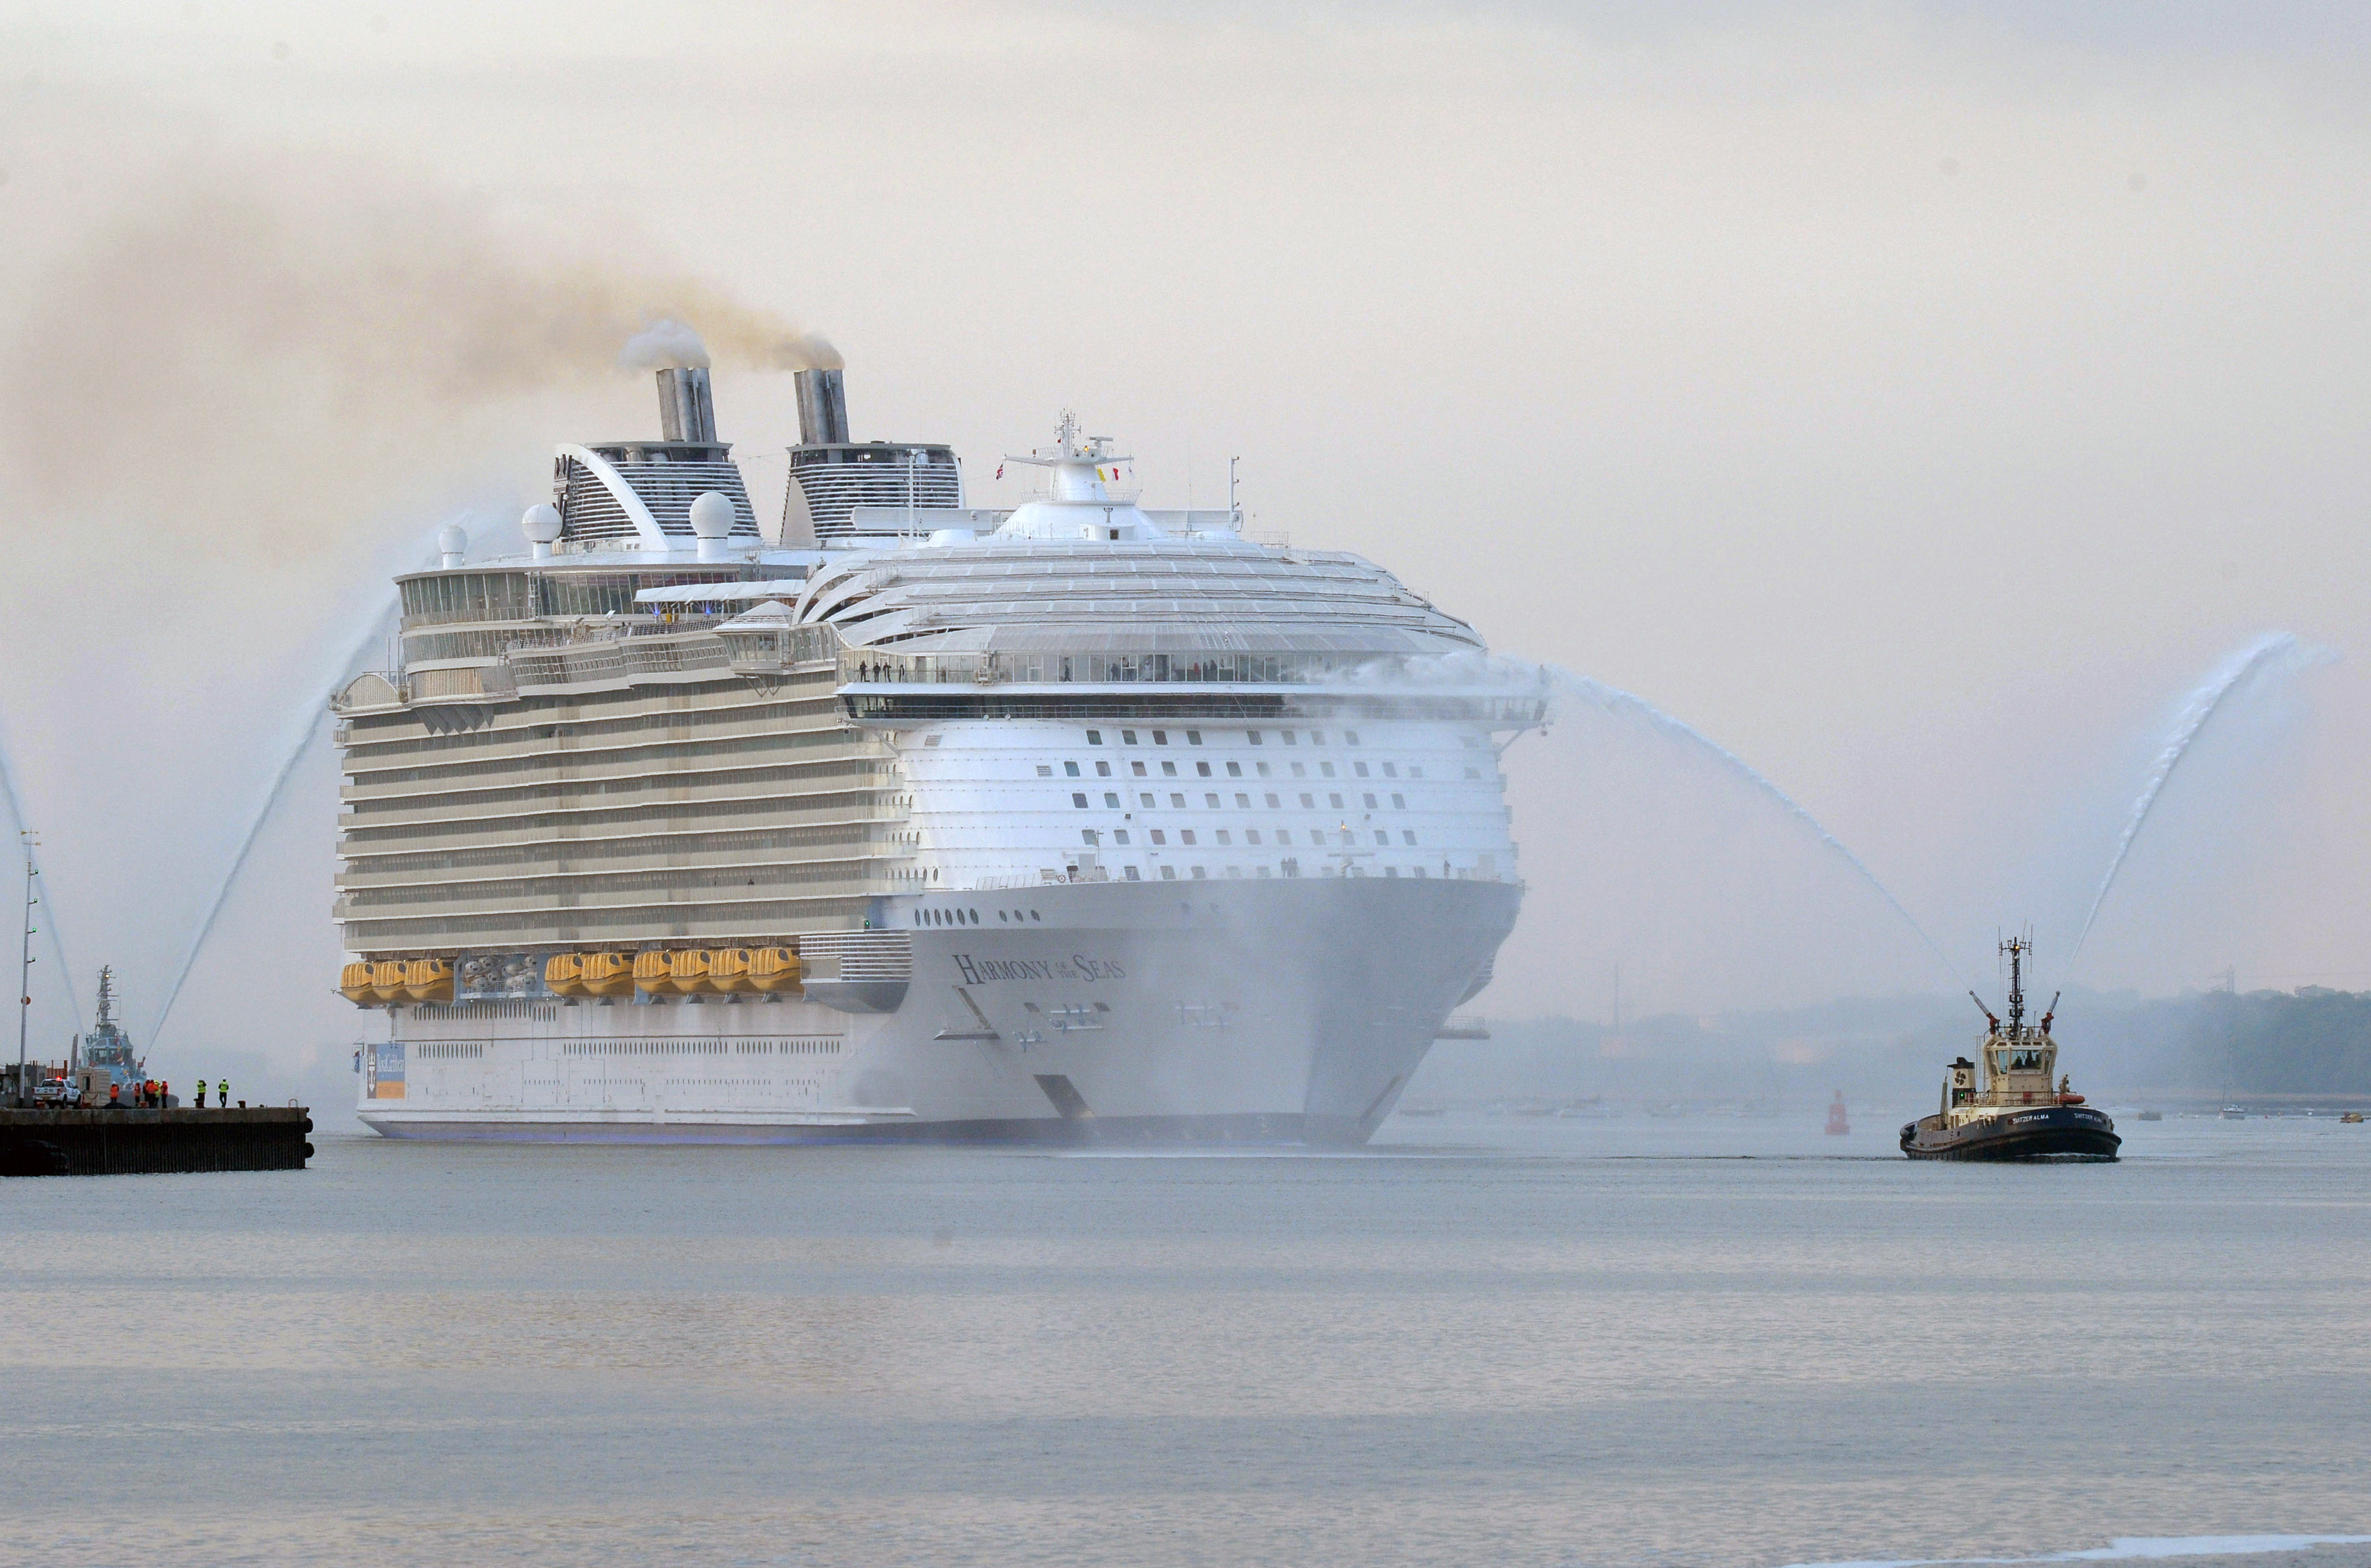 Harmony of the Seas arrives at Port of Southampton